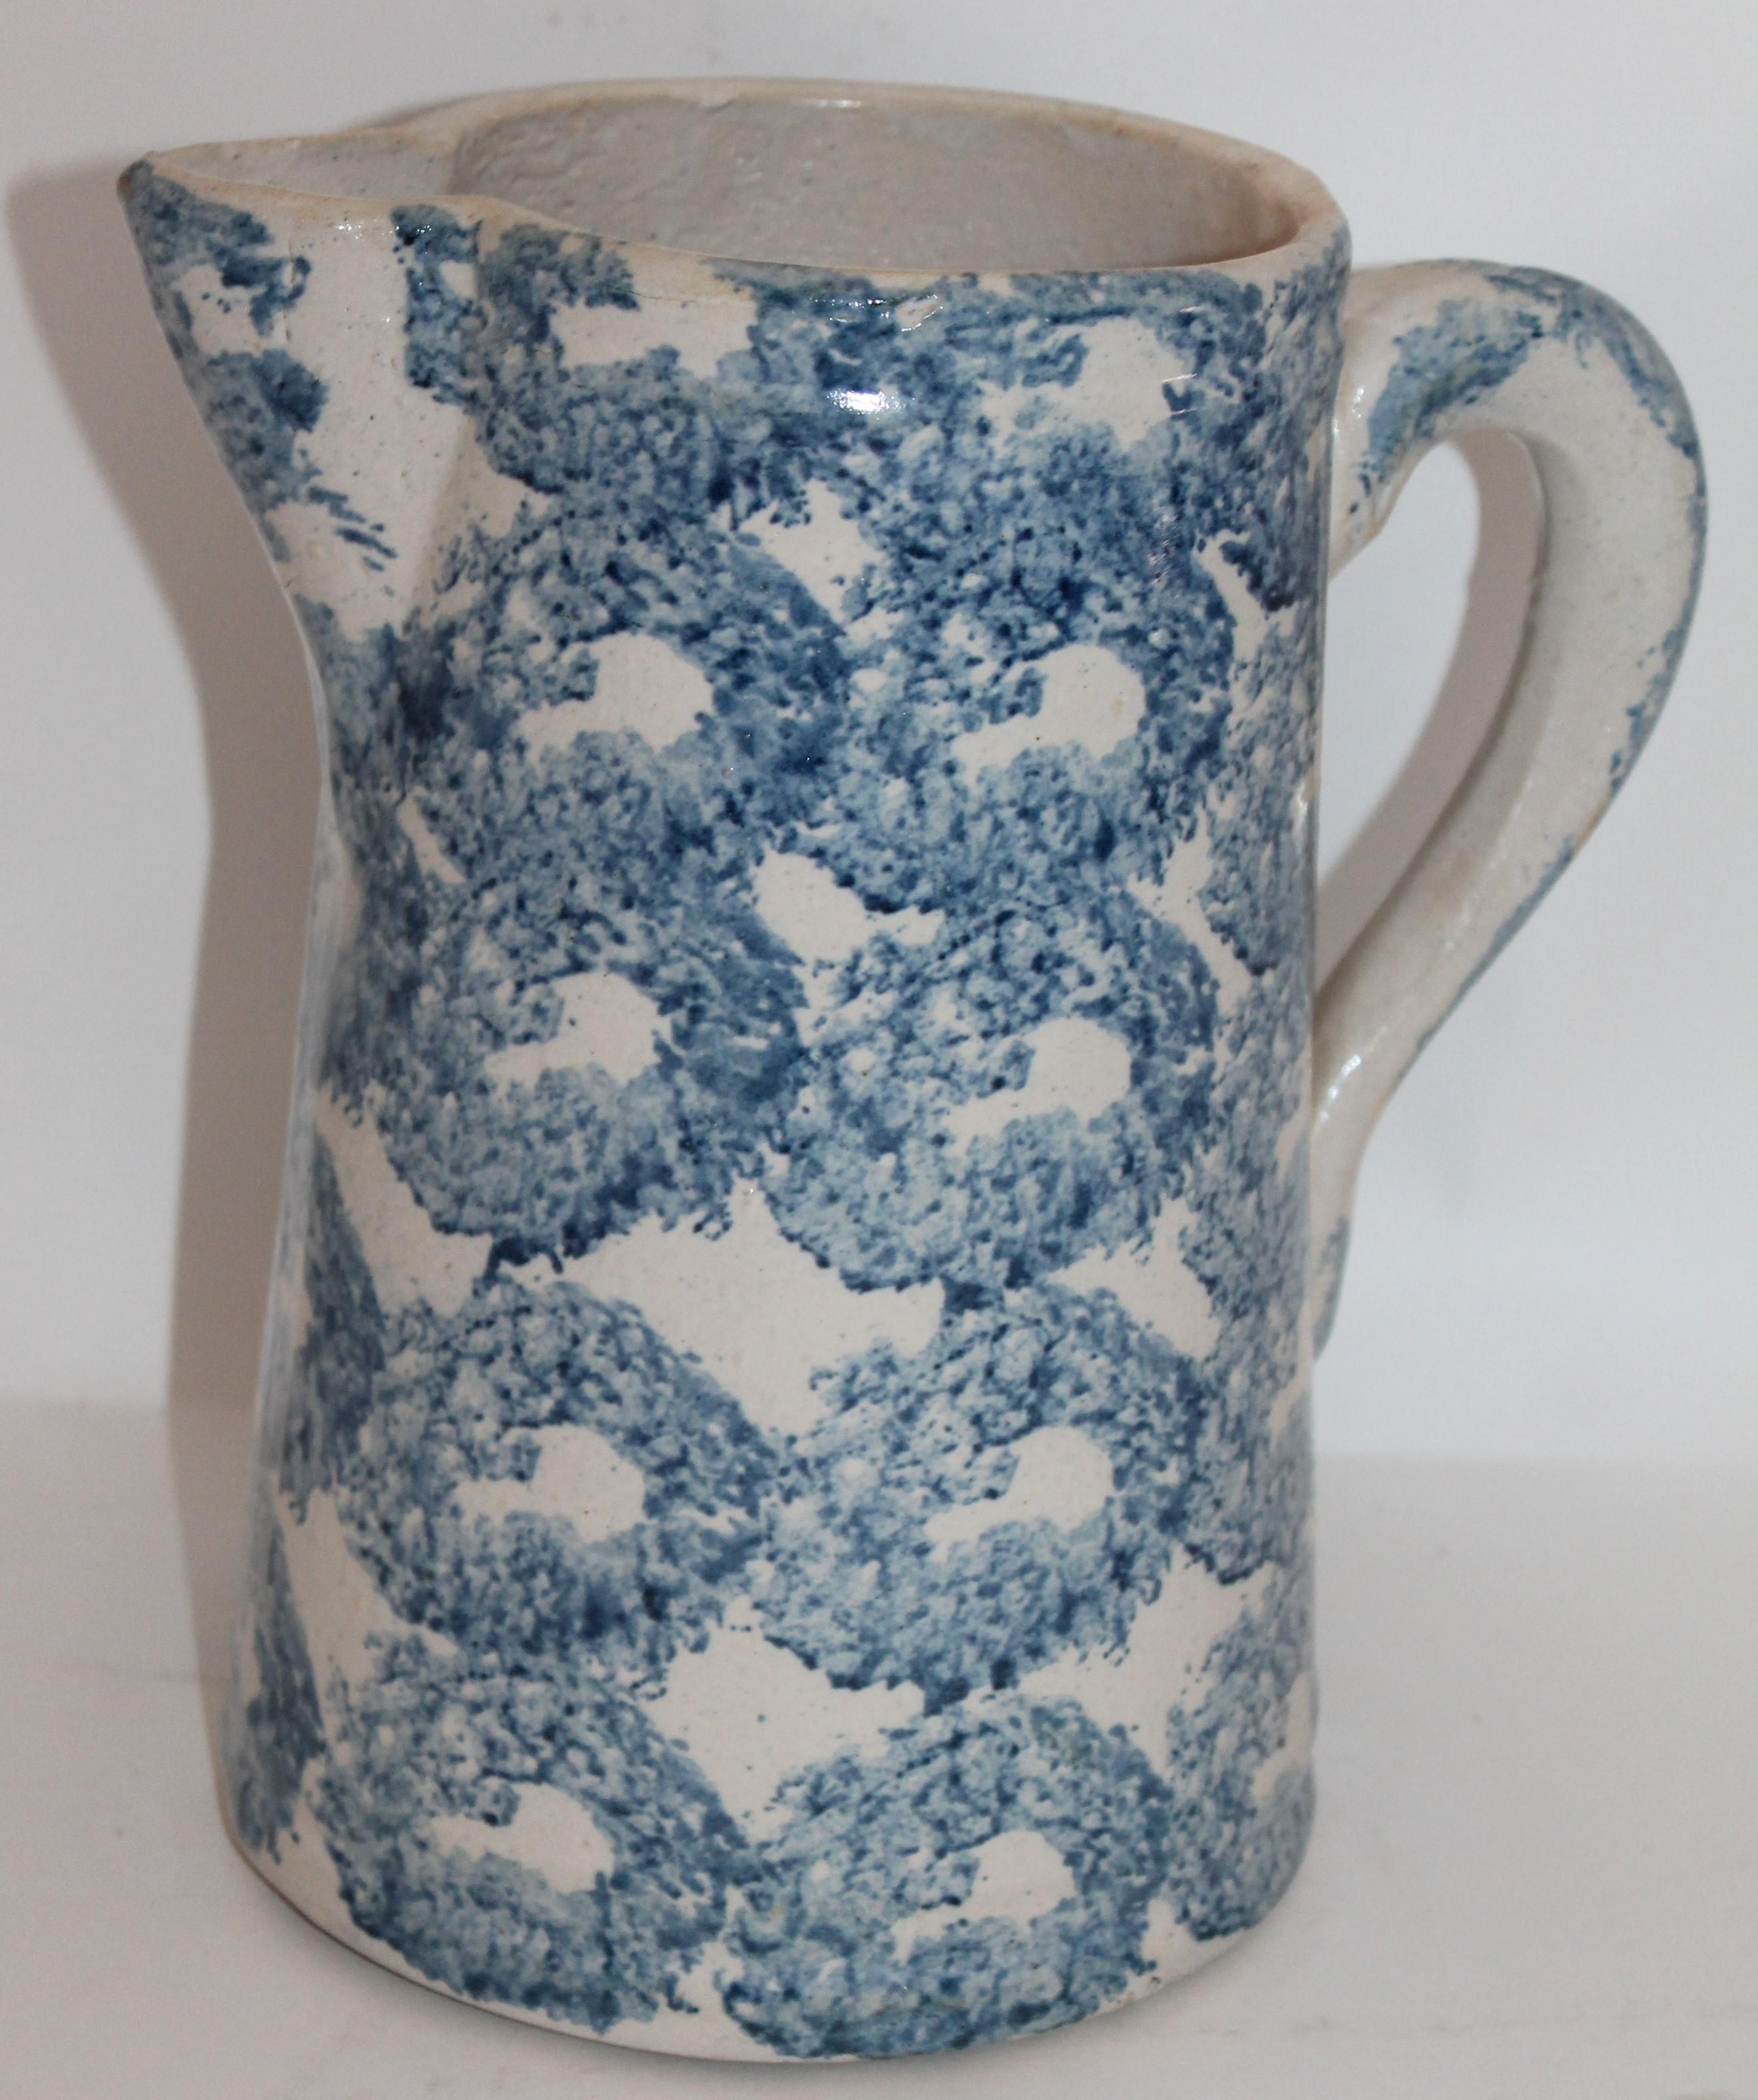 This fine 19th century sponge ware pottery pitcher is in fine condition and has the smoke ring pattern. Great shade of blue and great weight. Great for flowers on a table.